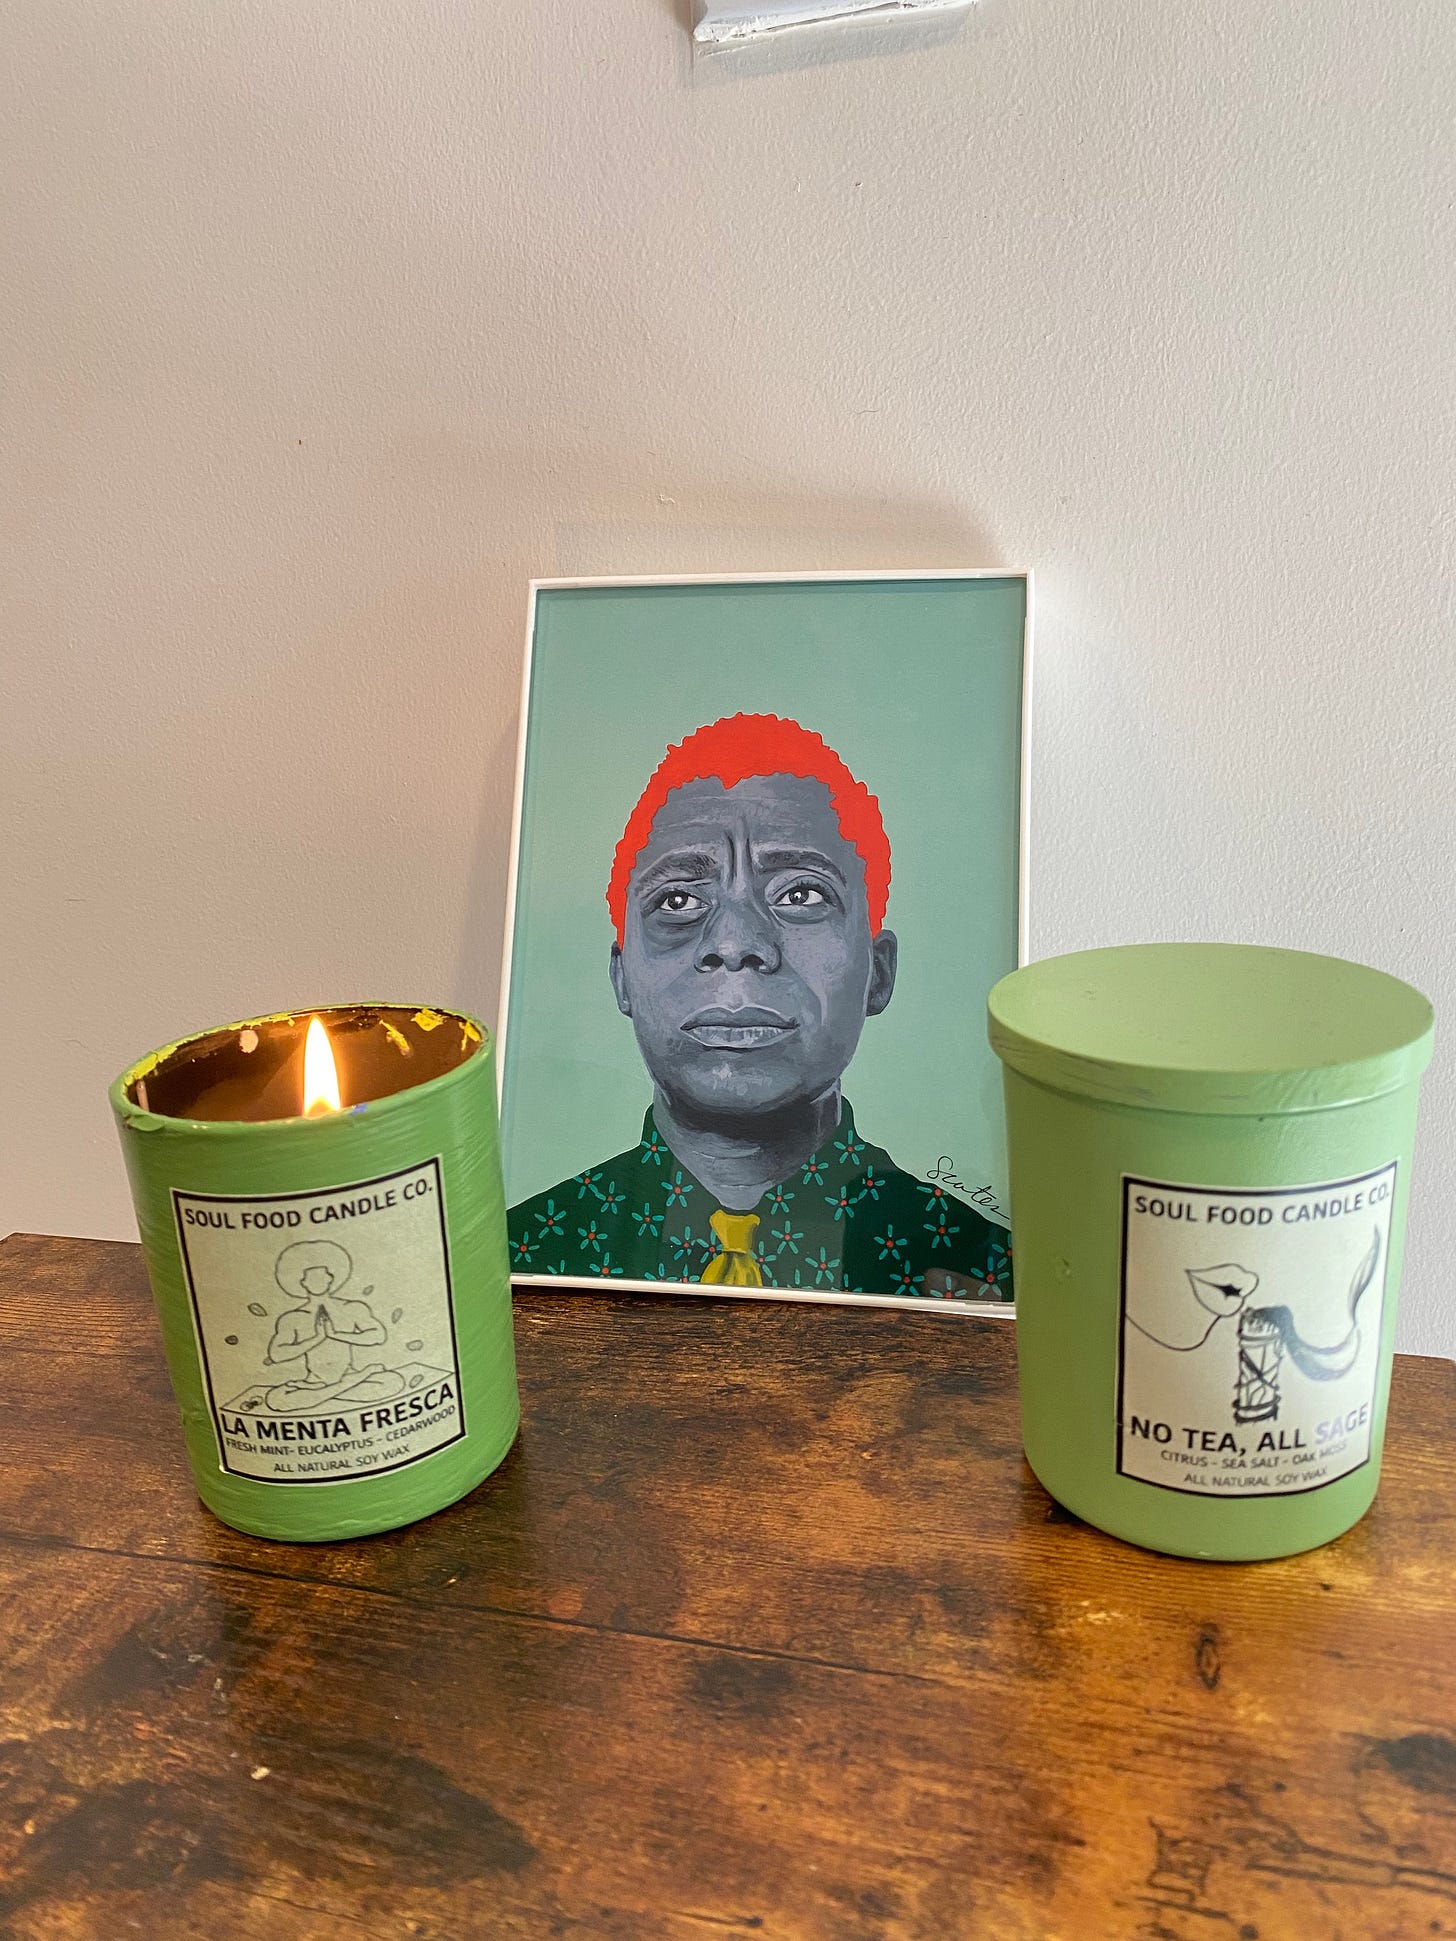 On a brown wood surface and against a white wall are two green candle jars. One has a shut lid and the other is open and aflame. Between them is an art deco artwork of James Baldwin.